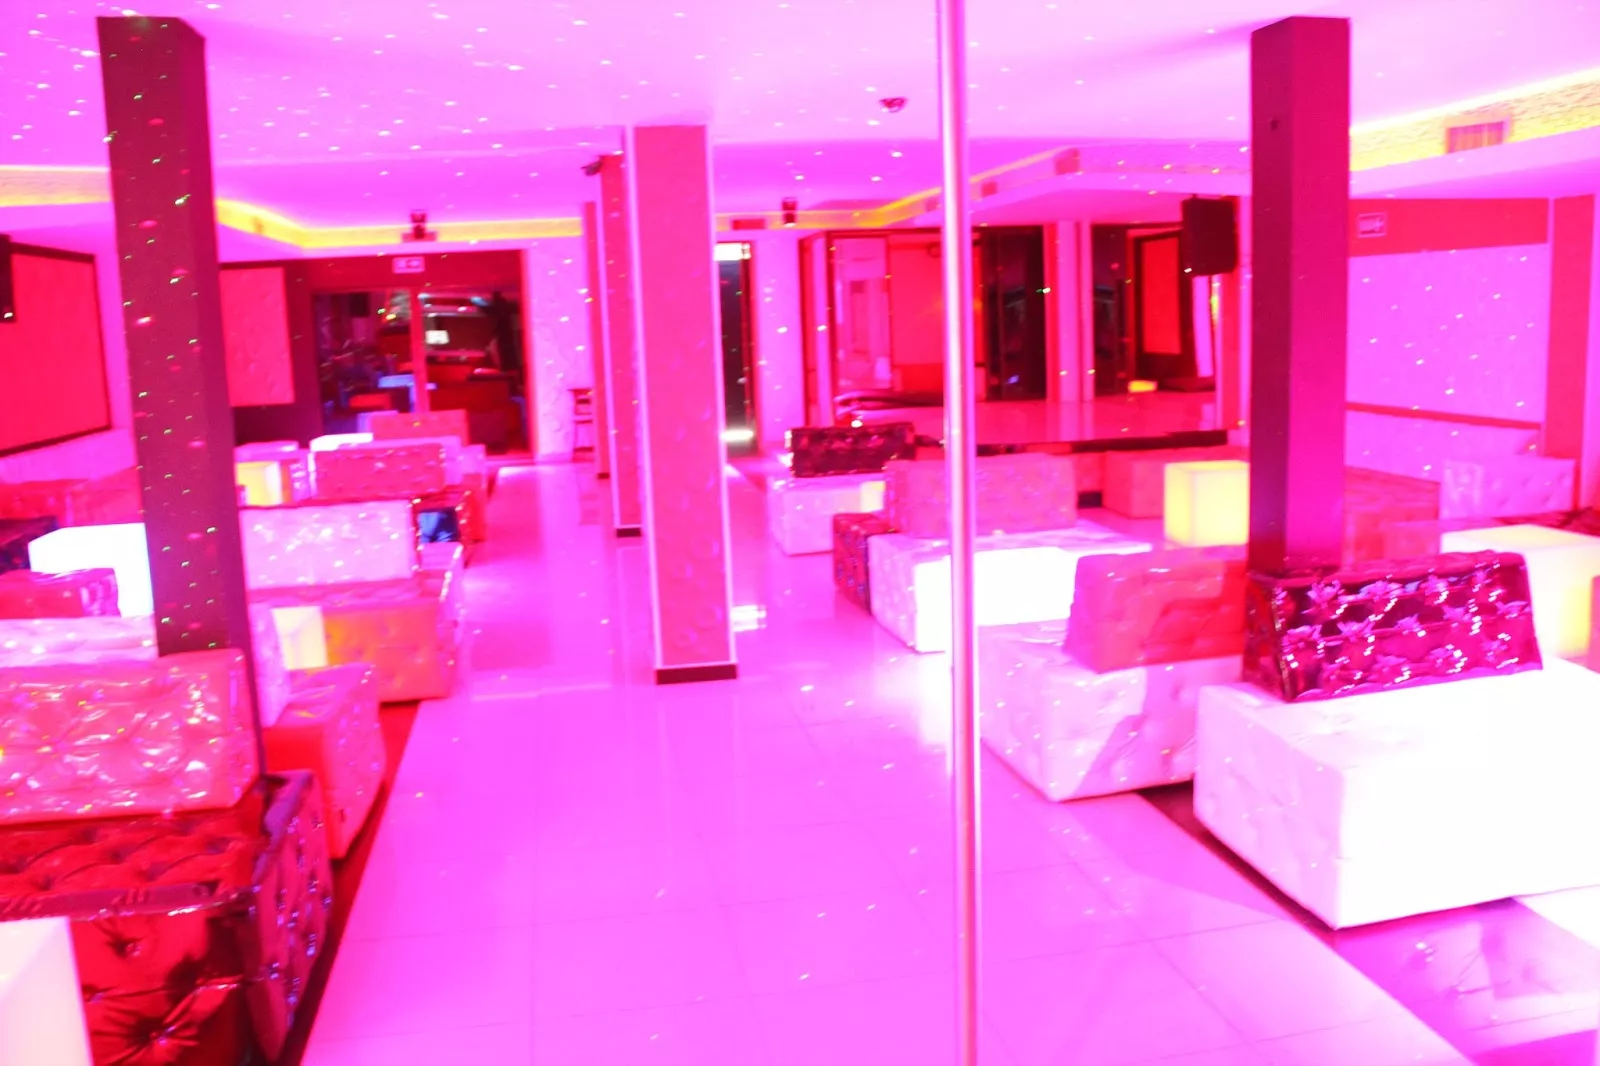 Deluxe Club in Colombia, South America  - Rated 0.9